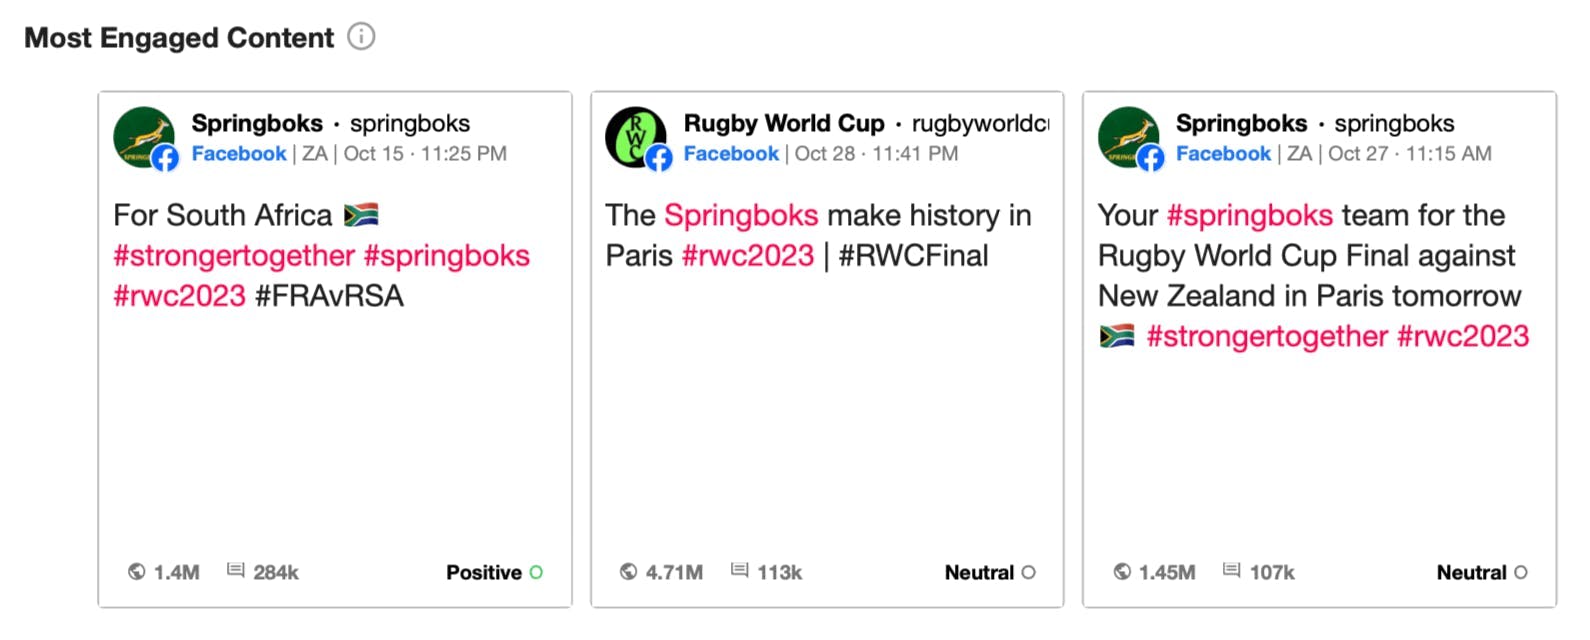 Most engaged content Springboks x Rugby World Cup 2023 Sponsorship analysis example